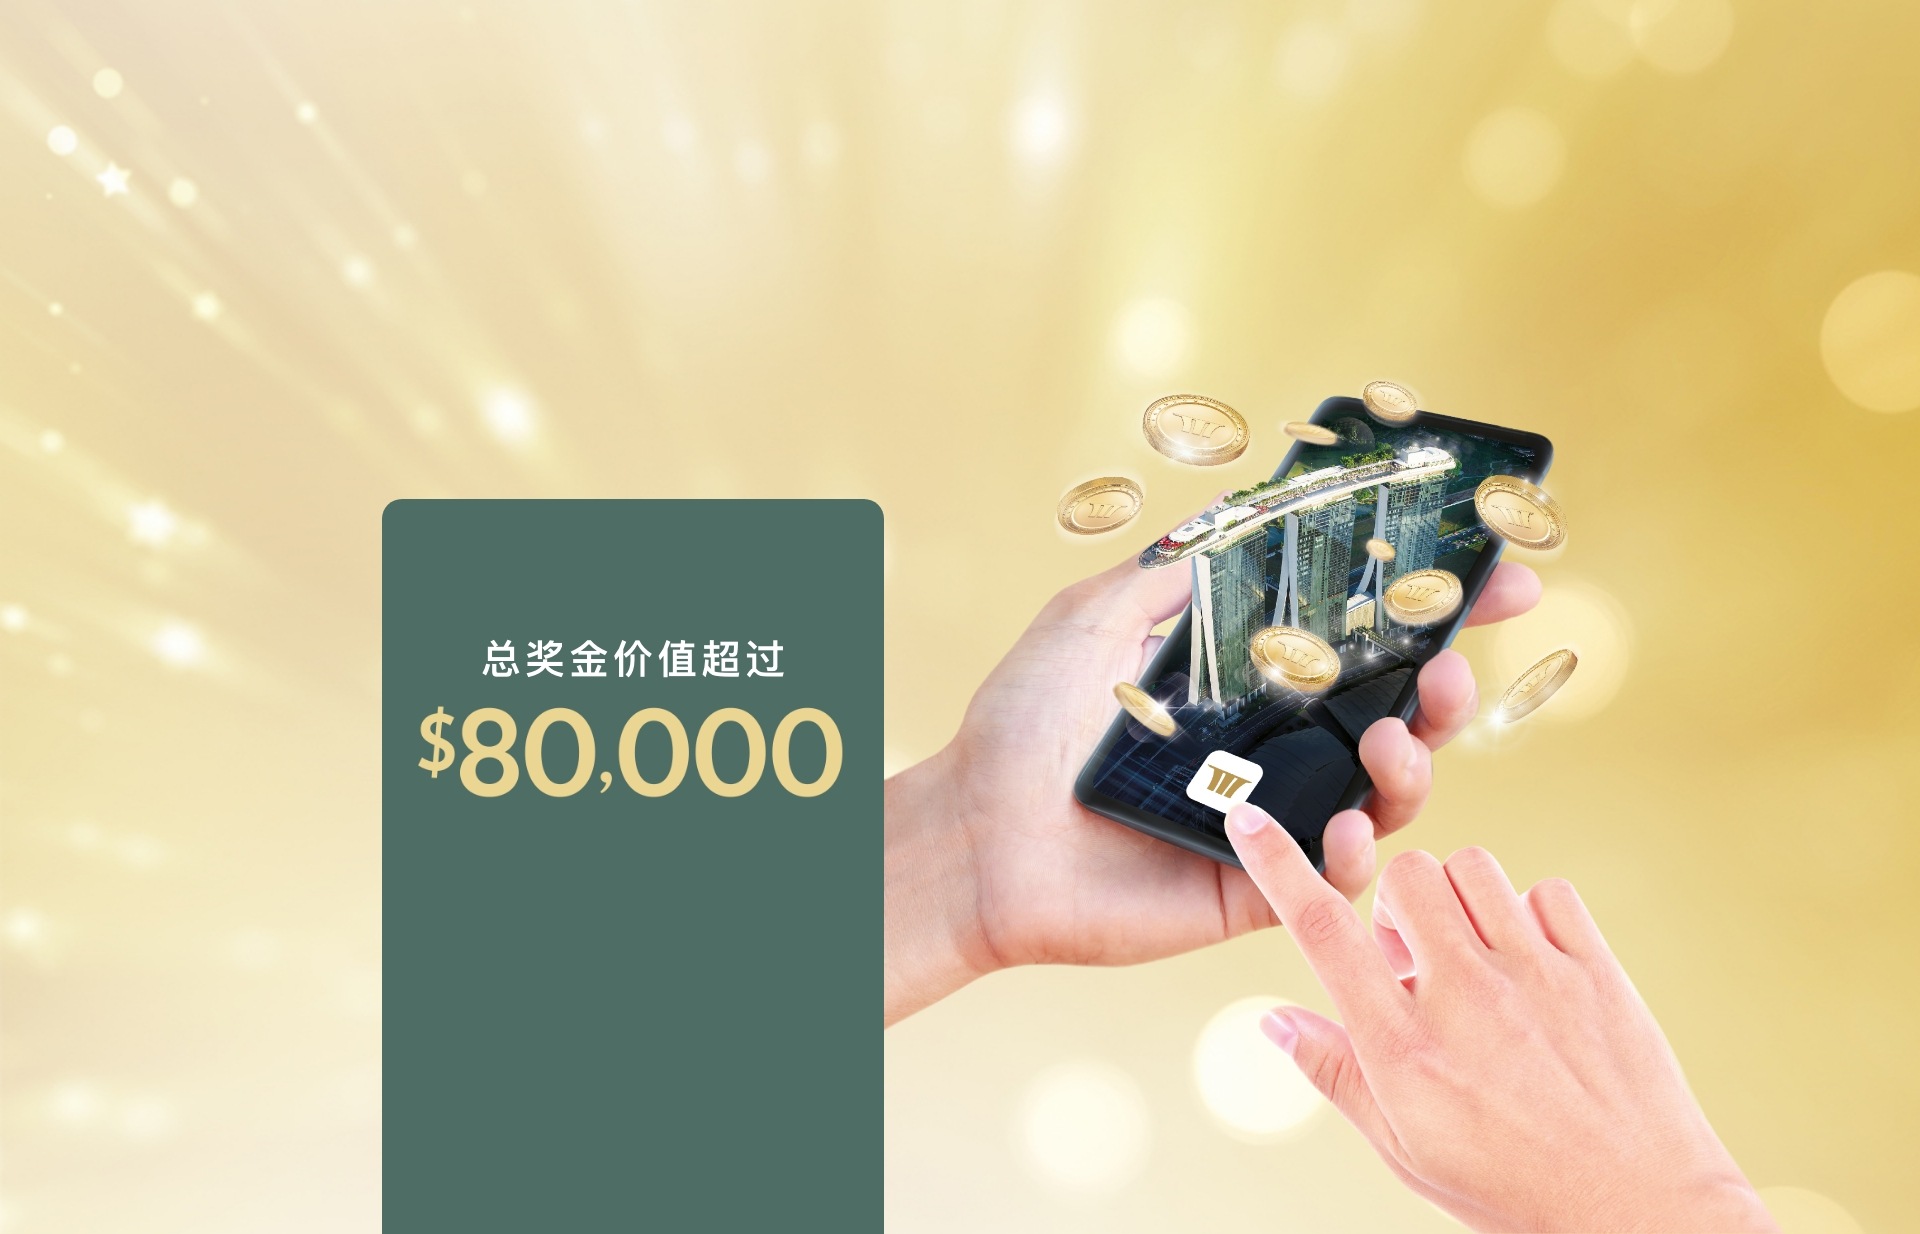 MOBILE APP LUCKY DRAW SERIES 